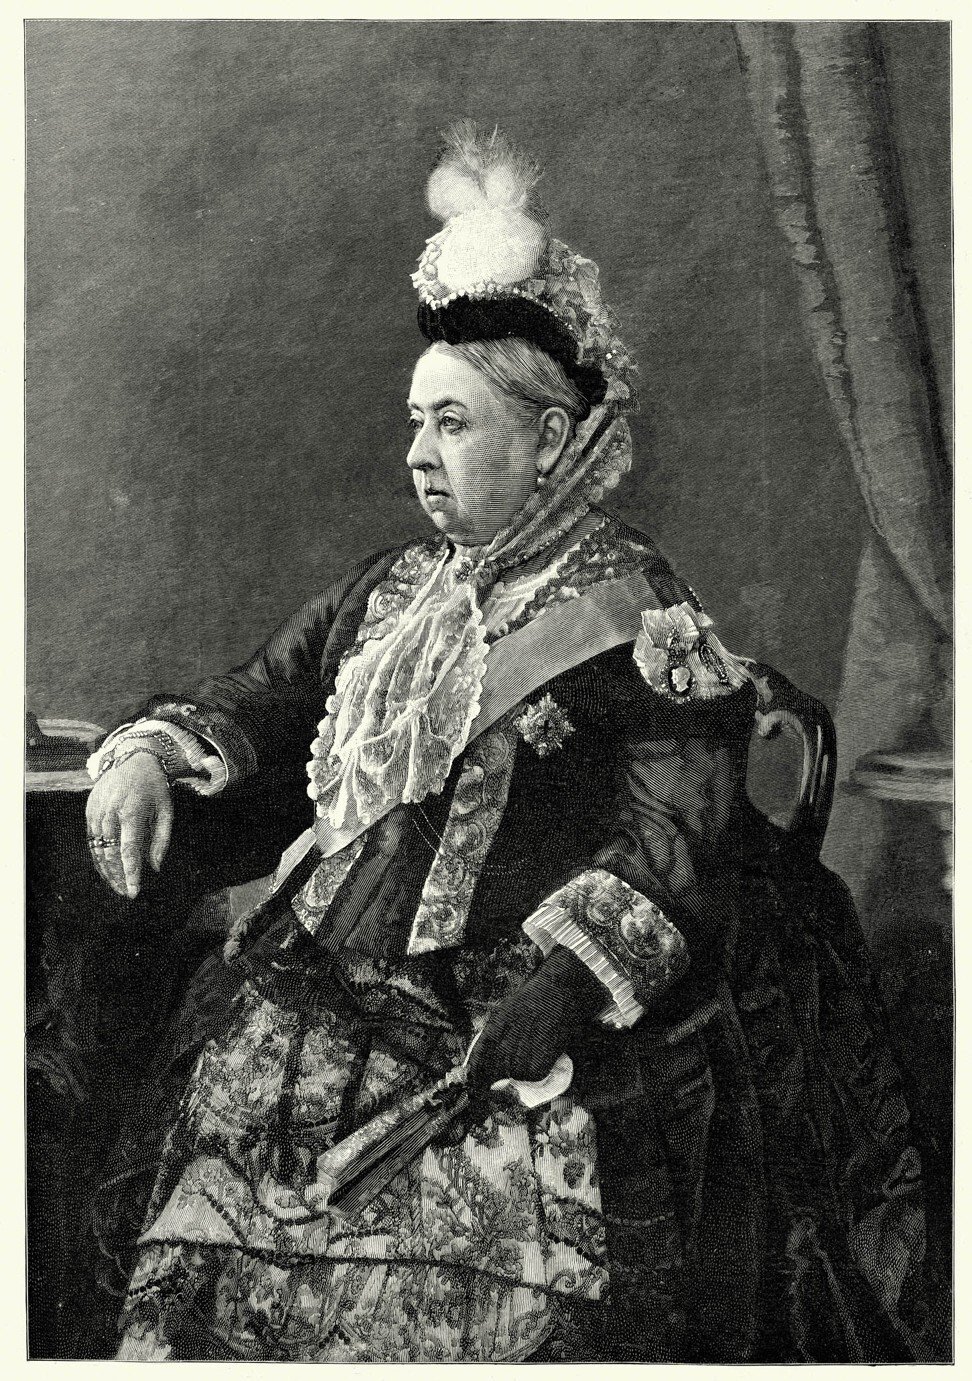 Vintage engraving of a portrait of Queen Victoria I. The Graphic, 1887. Photo: Getty Images